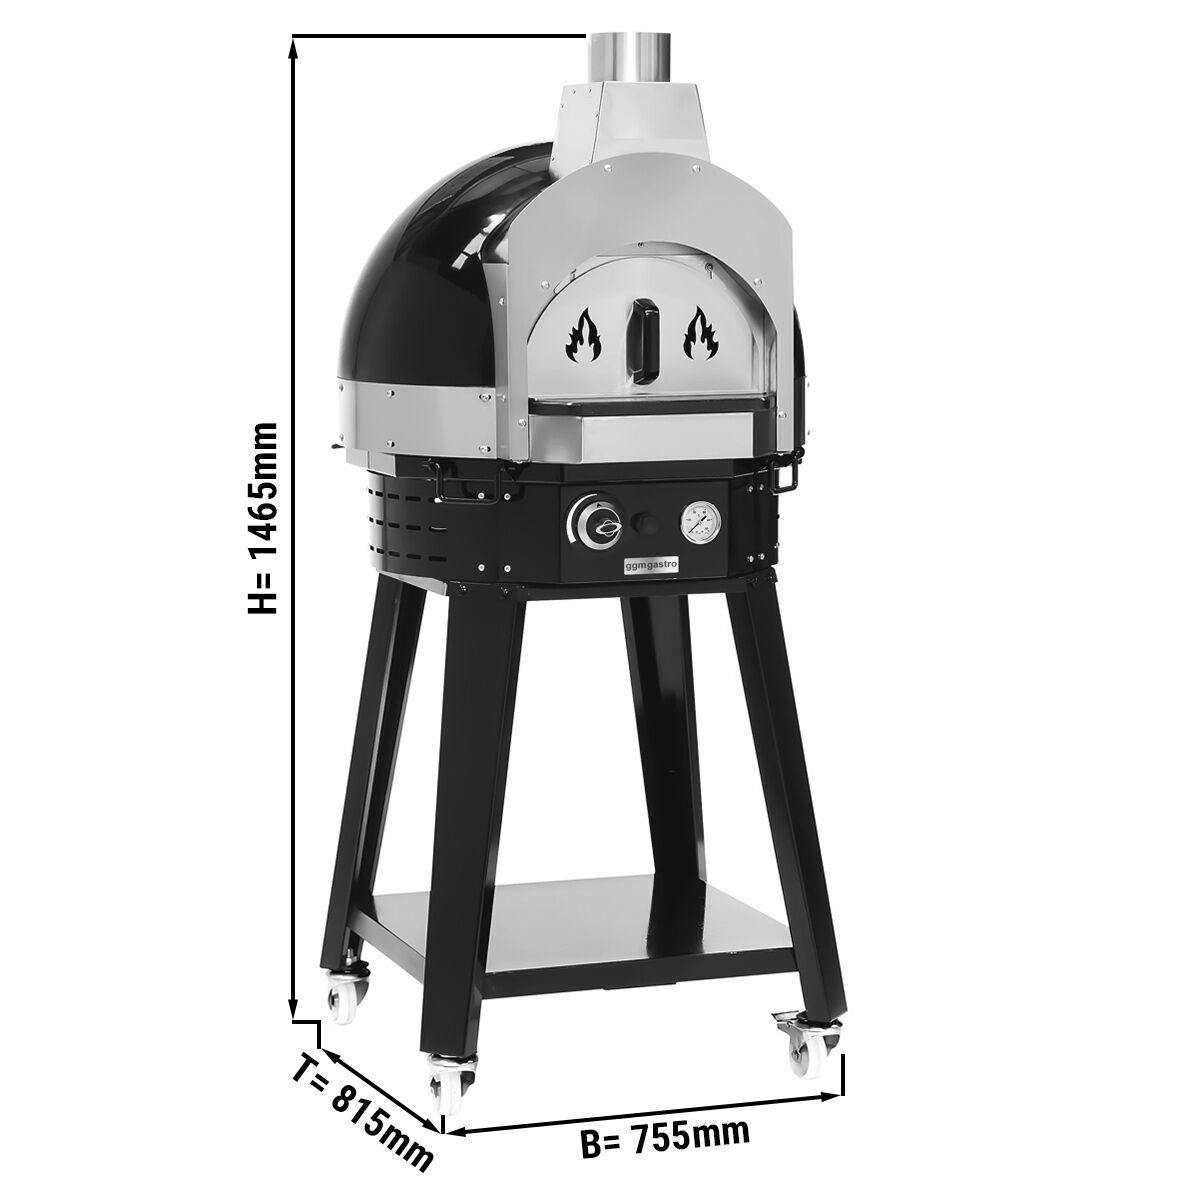 Gas pizza oven - Black - Height: 0.77m - Manual - incl. base frame